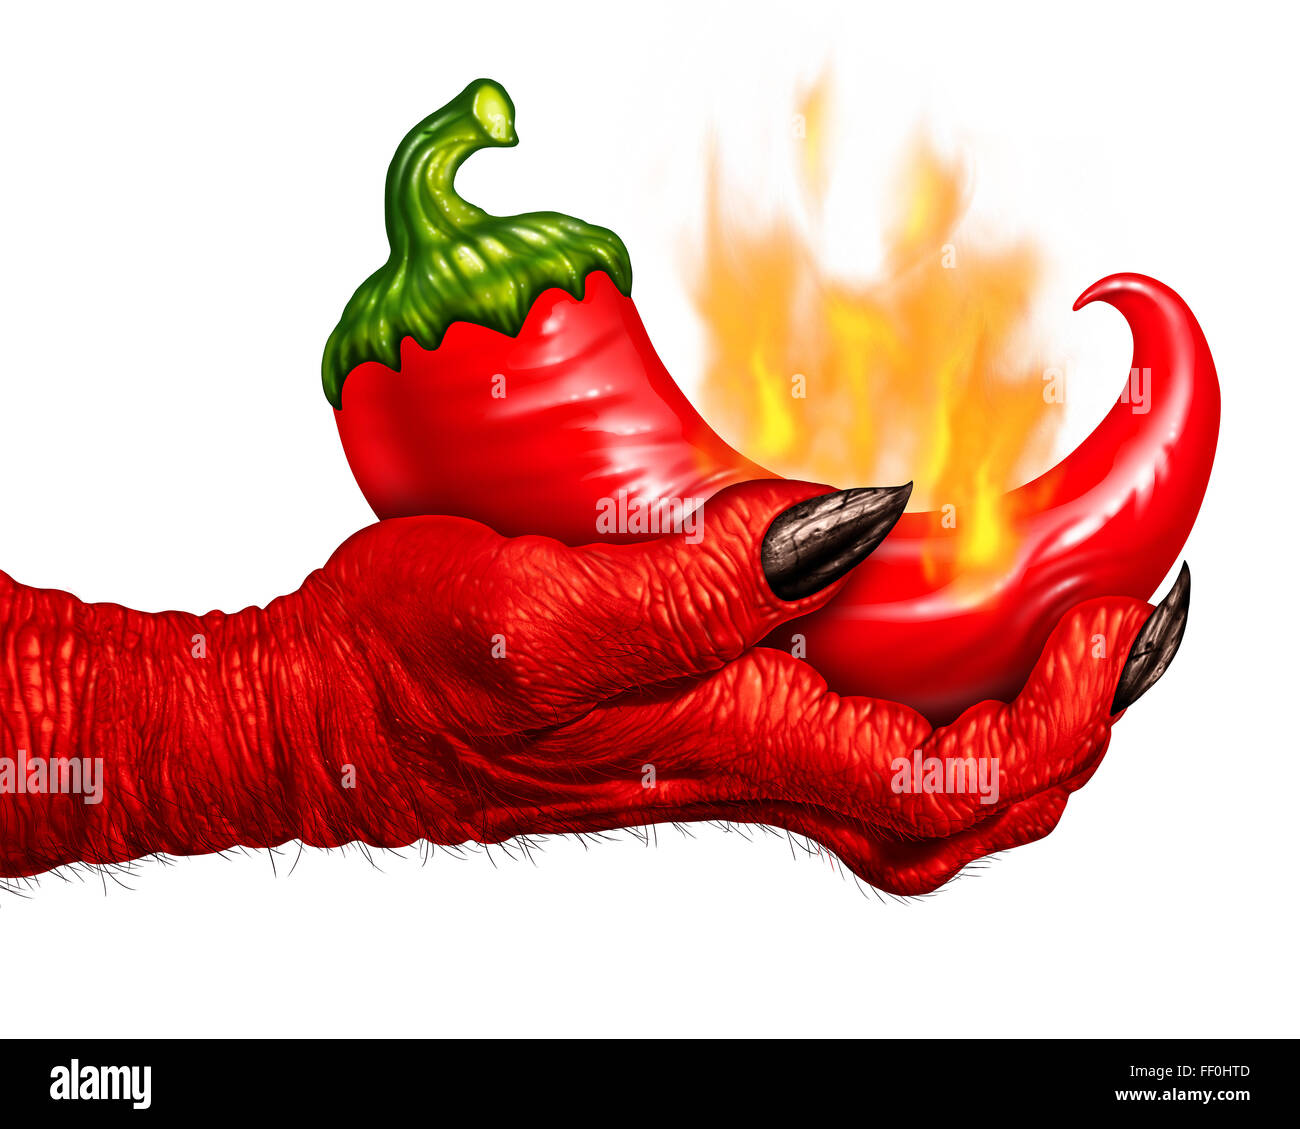 Hot pepper devil hand as a red chili burning in flames being held by a demon hand as a food symbol for spicy seasoning cooking isolated on a white background. Stock Photo